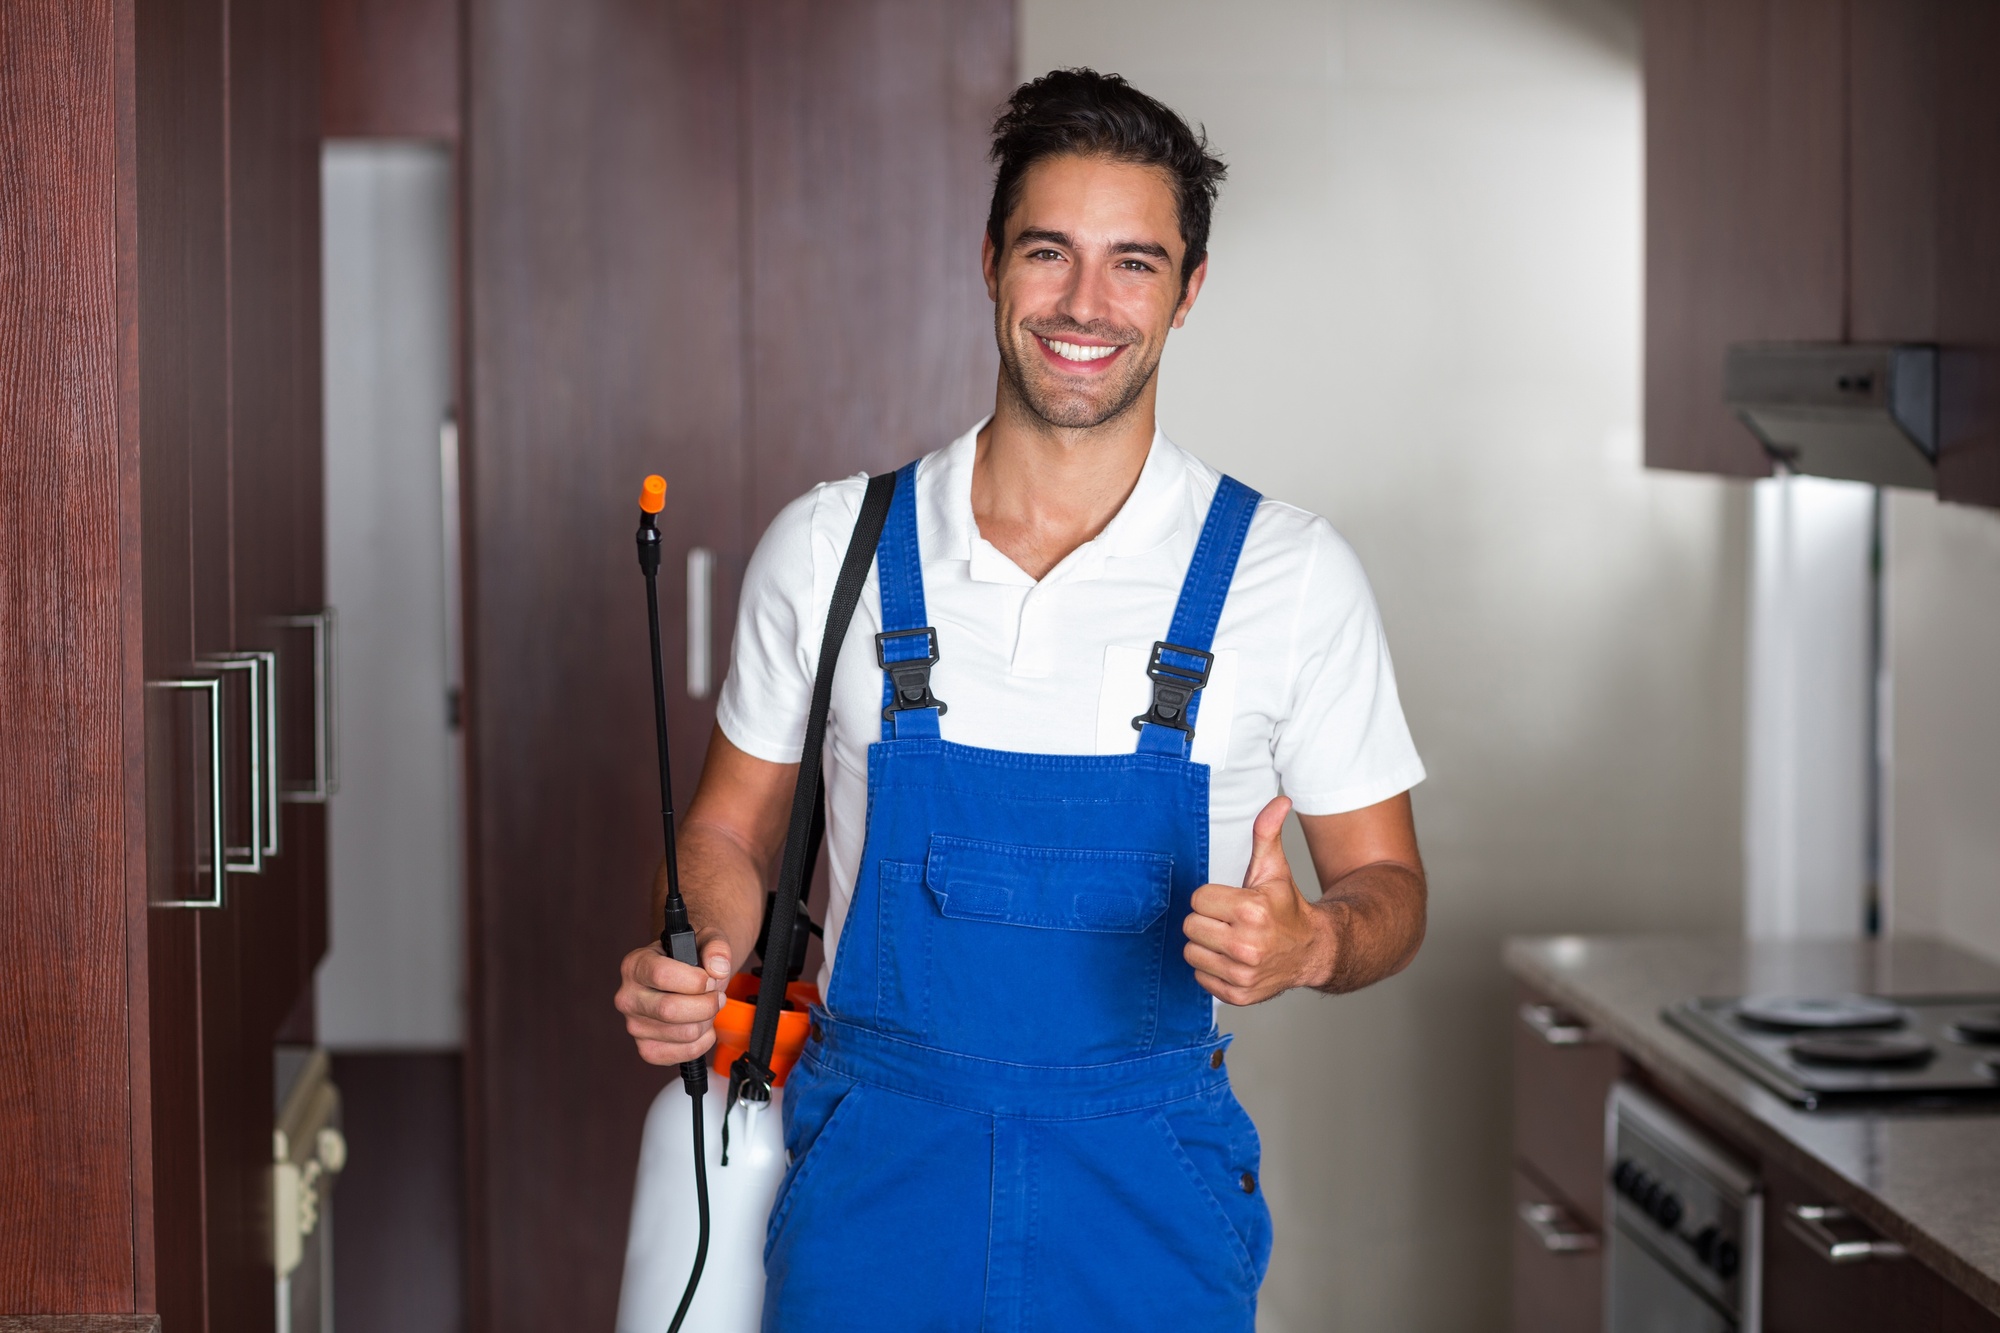 Did you know that not all pest removal companies are created equal these days? Here's how simple it is to choose the best pest control company in your area.